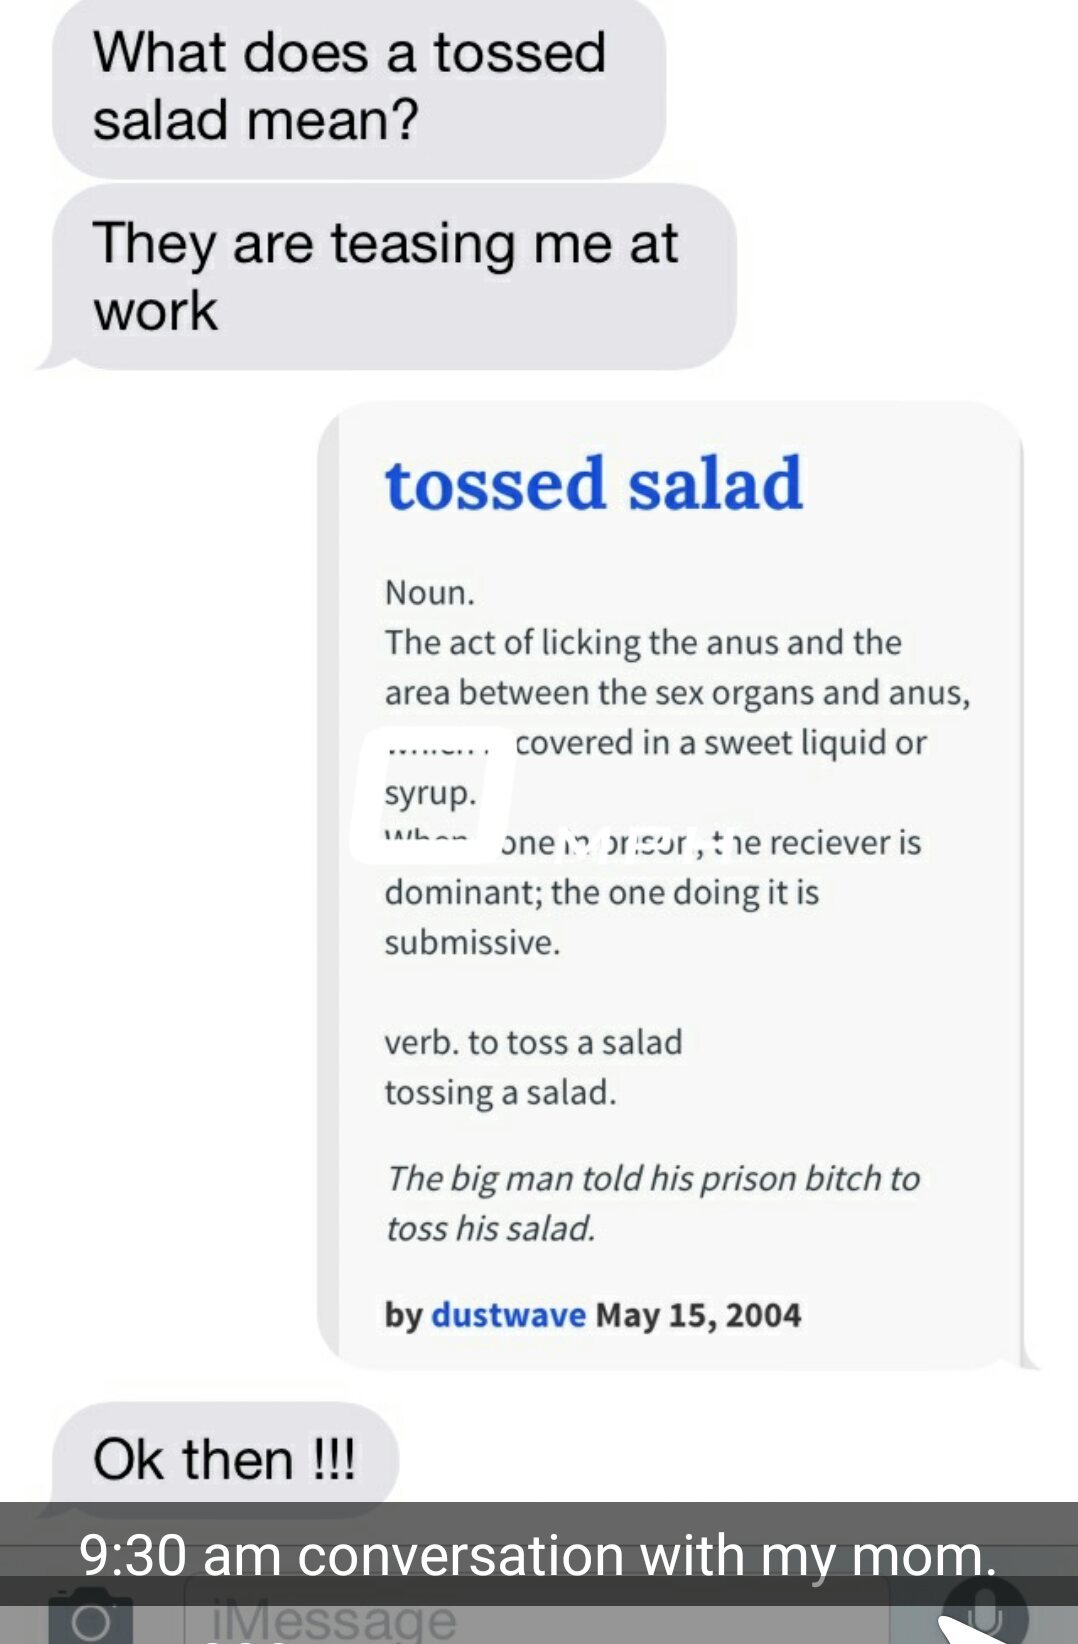 bud bywater recommends what does it mean to toss your salad pic